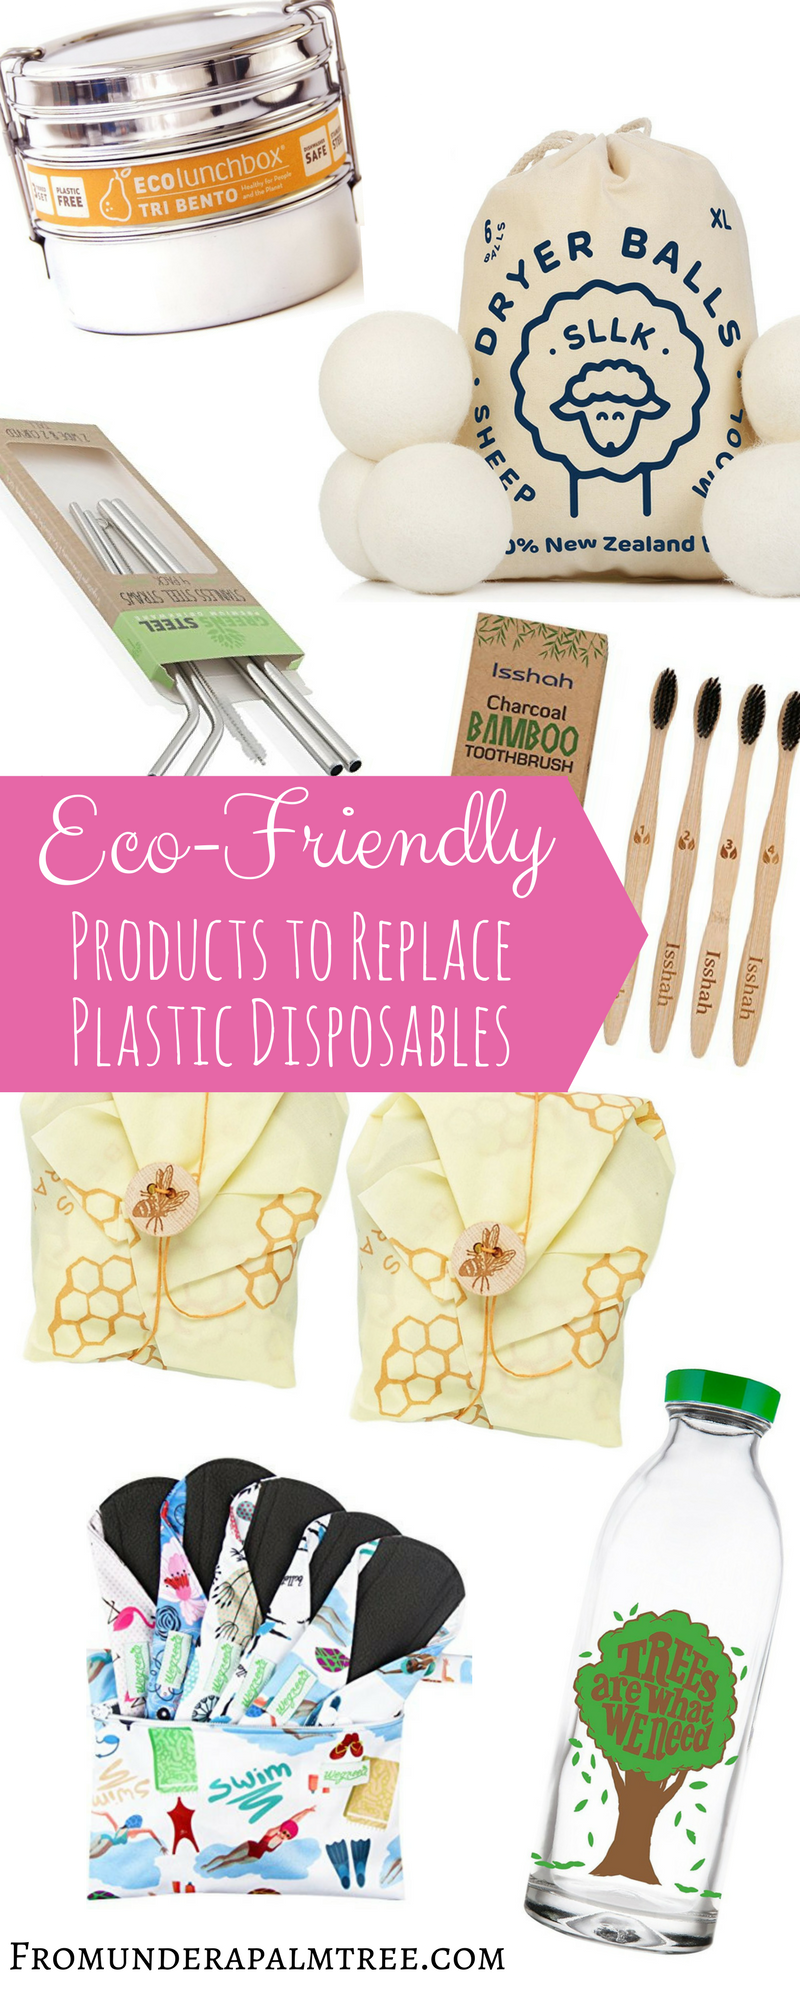 7 Eco-Friendly Products to Replace Plastic Disposables | Disposable Plastic Alternatives | Eco-friendly | Go Green | Sustainable living | single-use plastic alternatives | Earth Day | Reusable | recycle | biodegradable | green living | sustainable | reusable pads | menstrual cups | reusable straws | eco-friendly straws | faucet face | dryer balls | ECOlunchbox | bees wrap | charcoal | toothbrush |